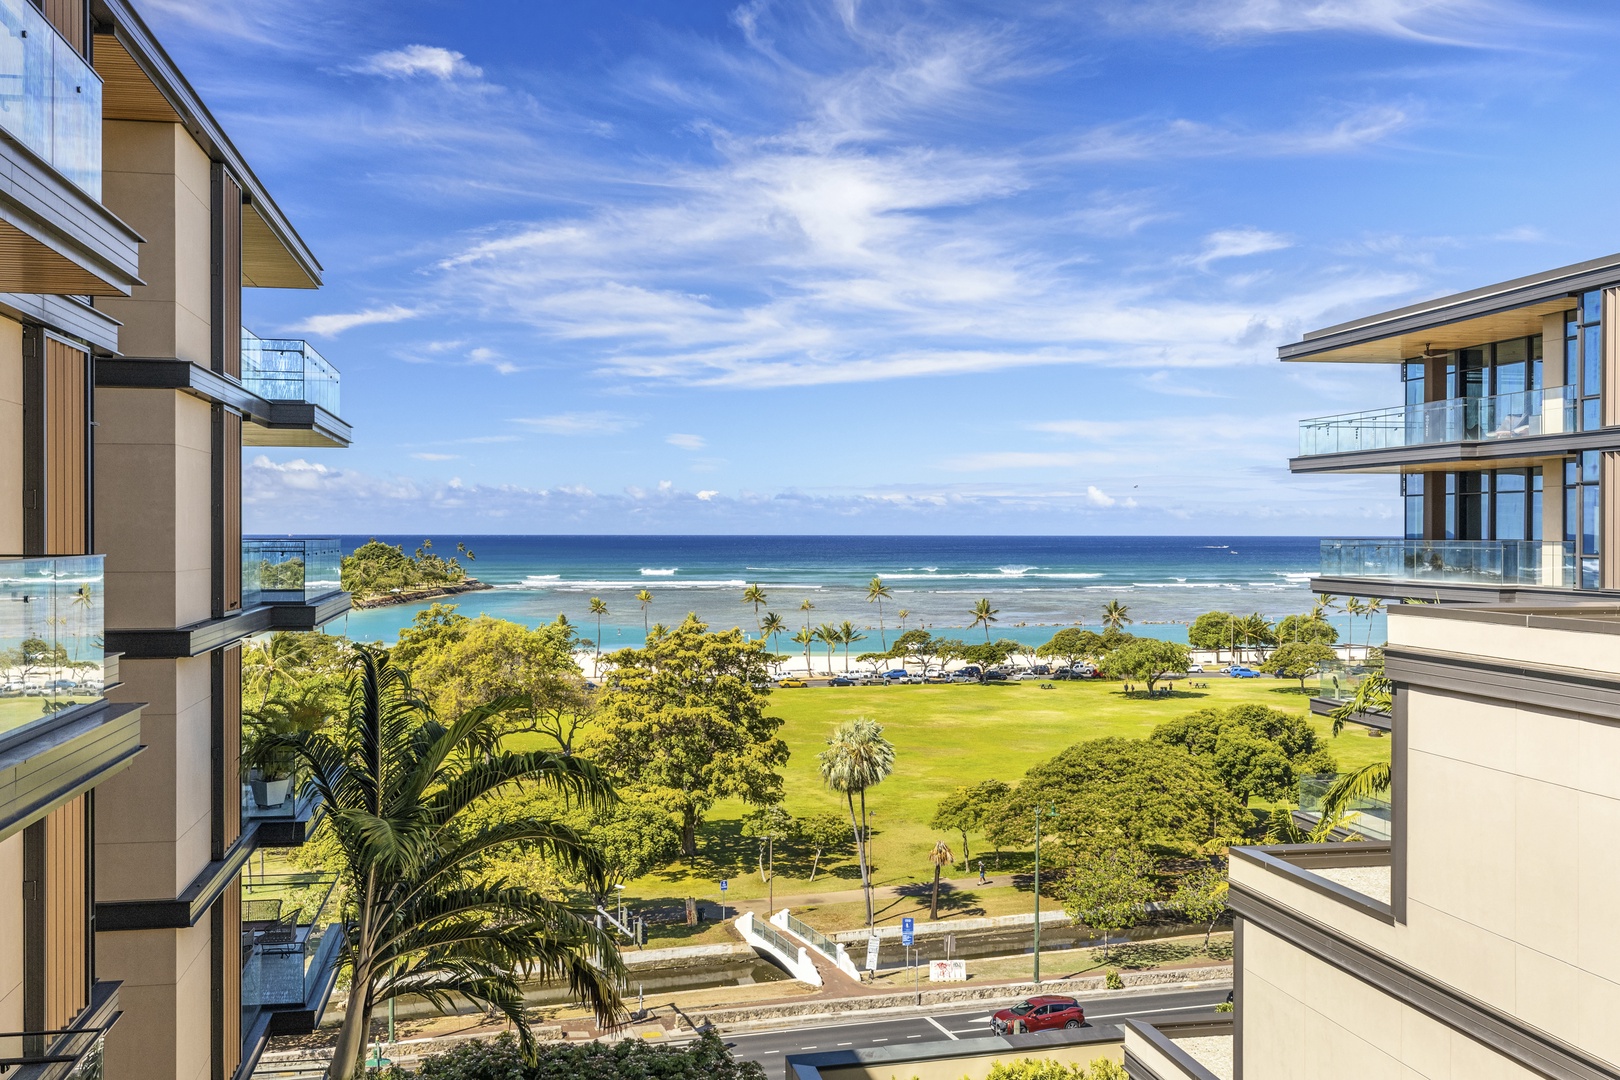 Honolulu Vacation Rentals, Park Lane Sky Resort - Sweeping ocean views from the comfort of your private lanai